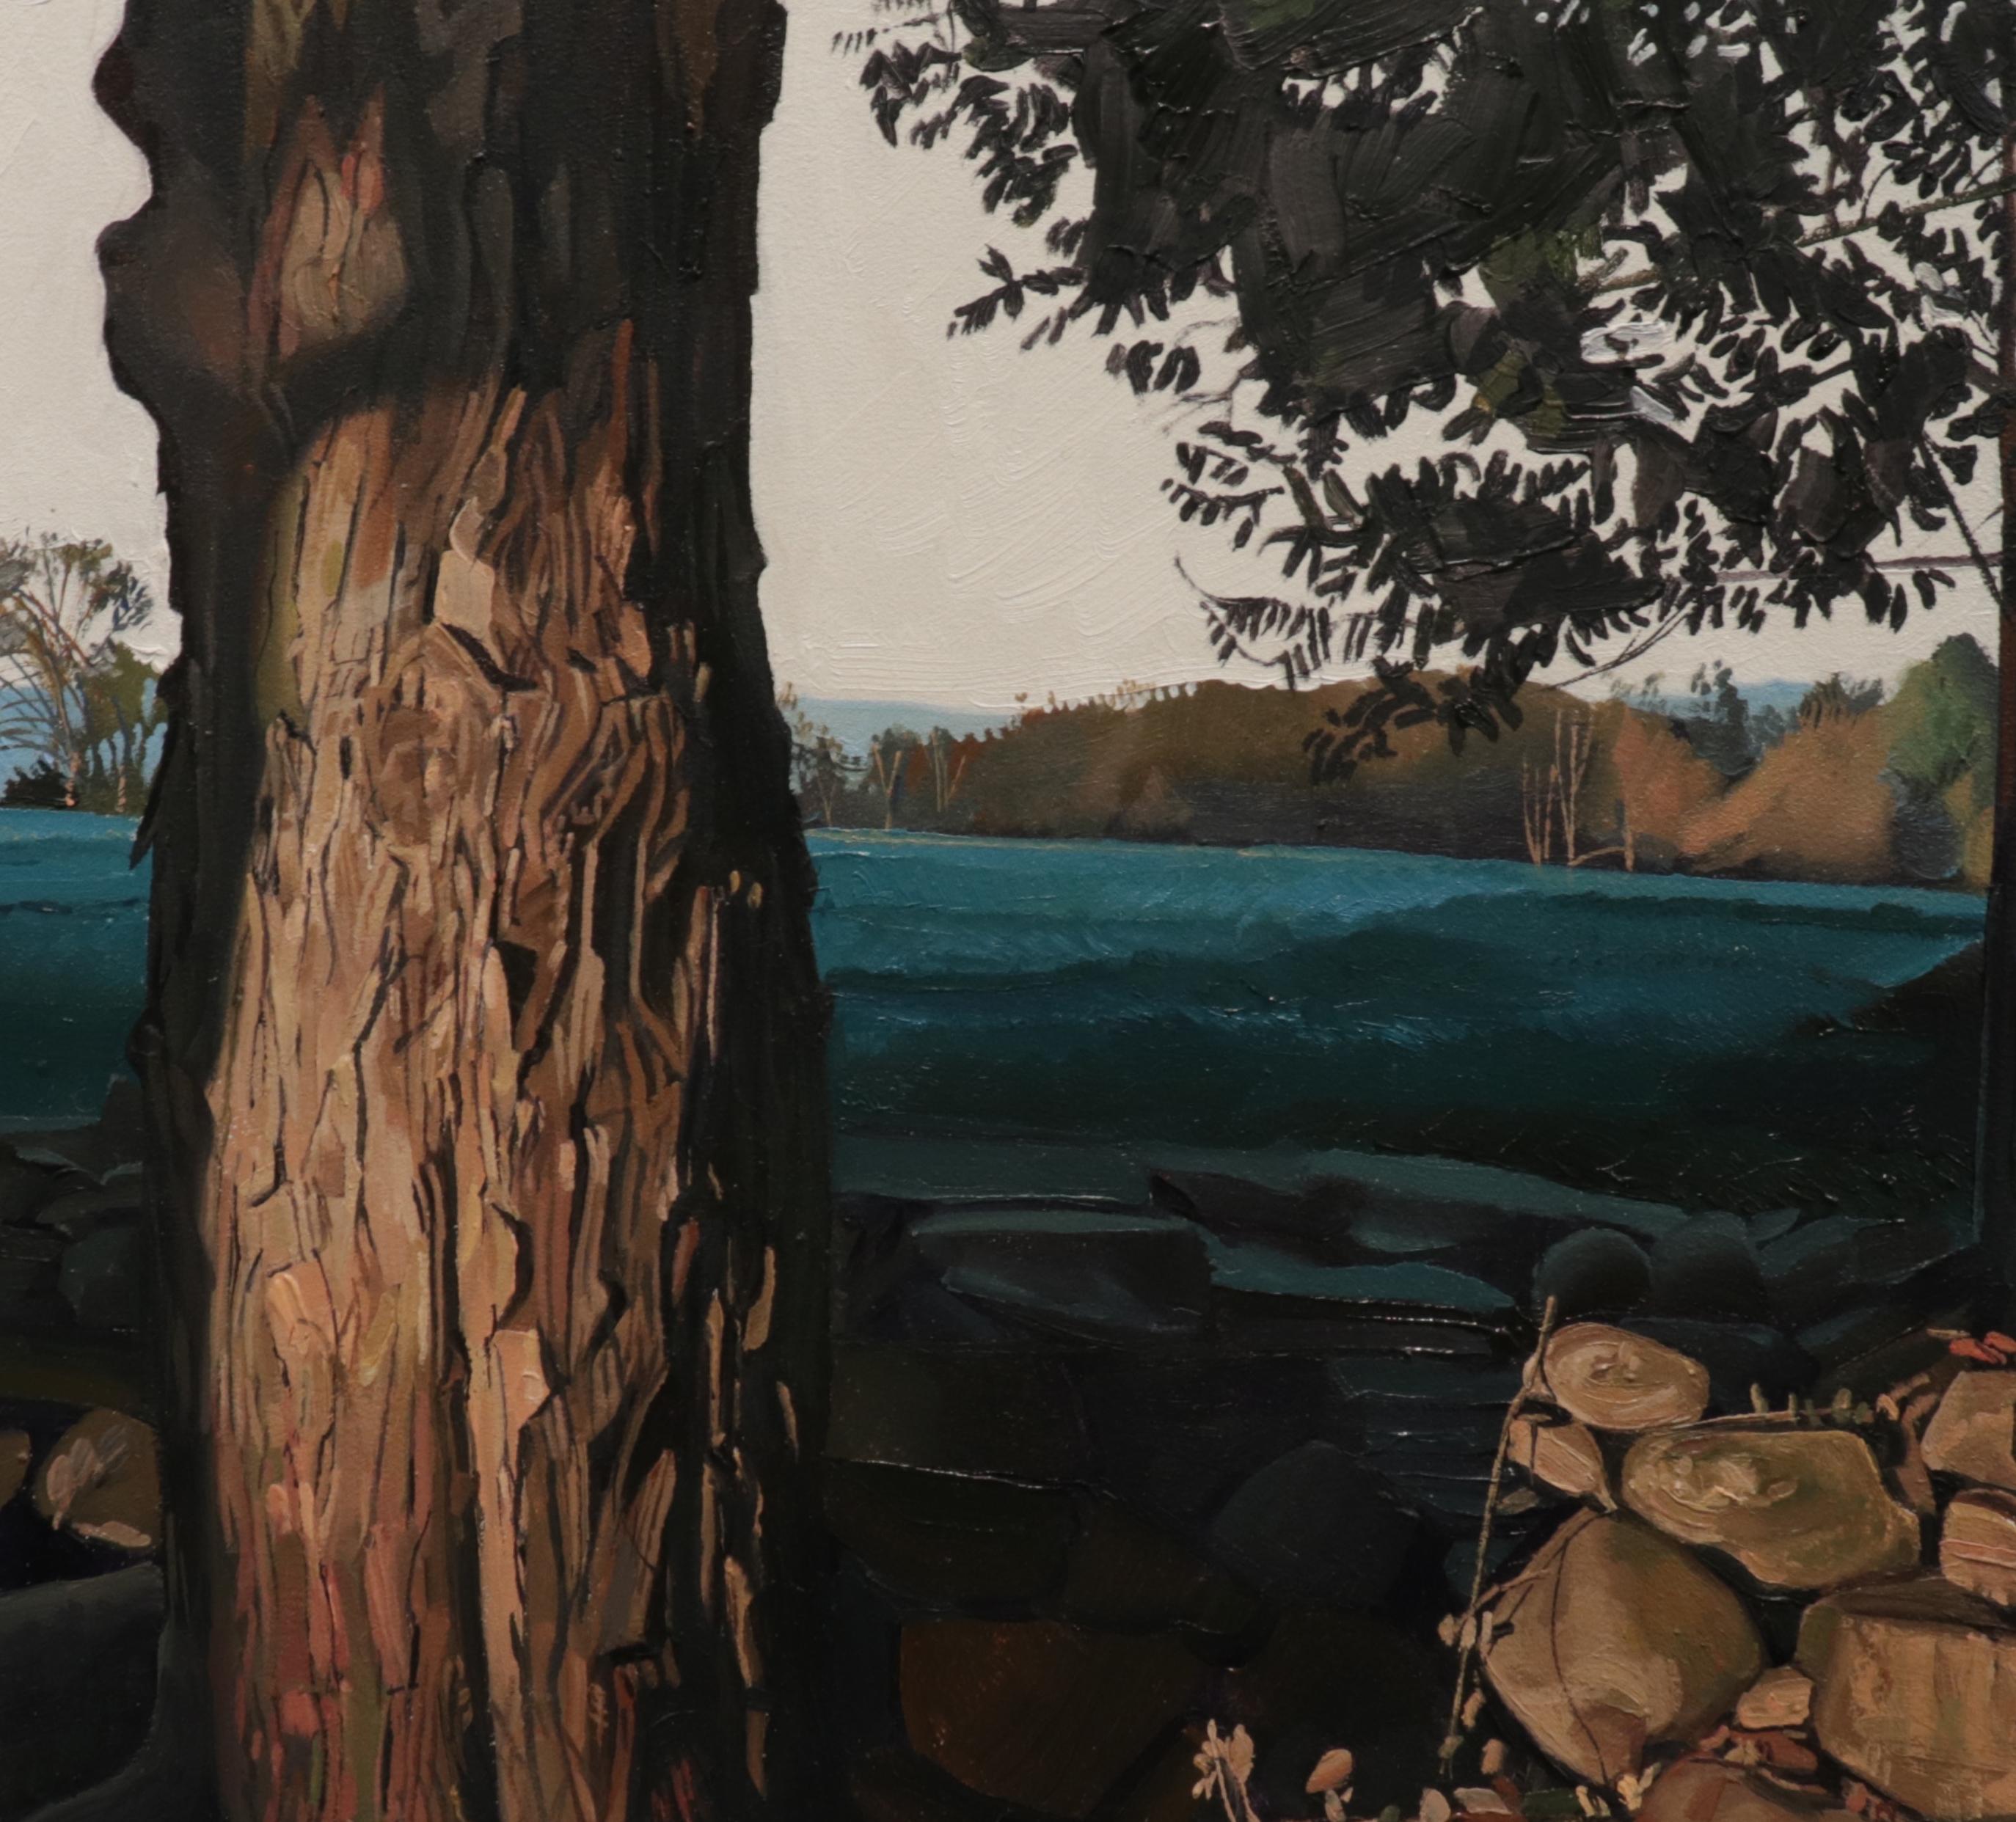 TREES ON A LINE #35, trees in the country, hyper-realism, country landscape - Naturalistic Painting by Trey Friedman